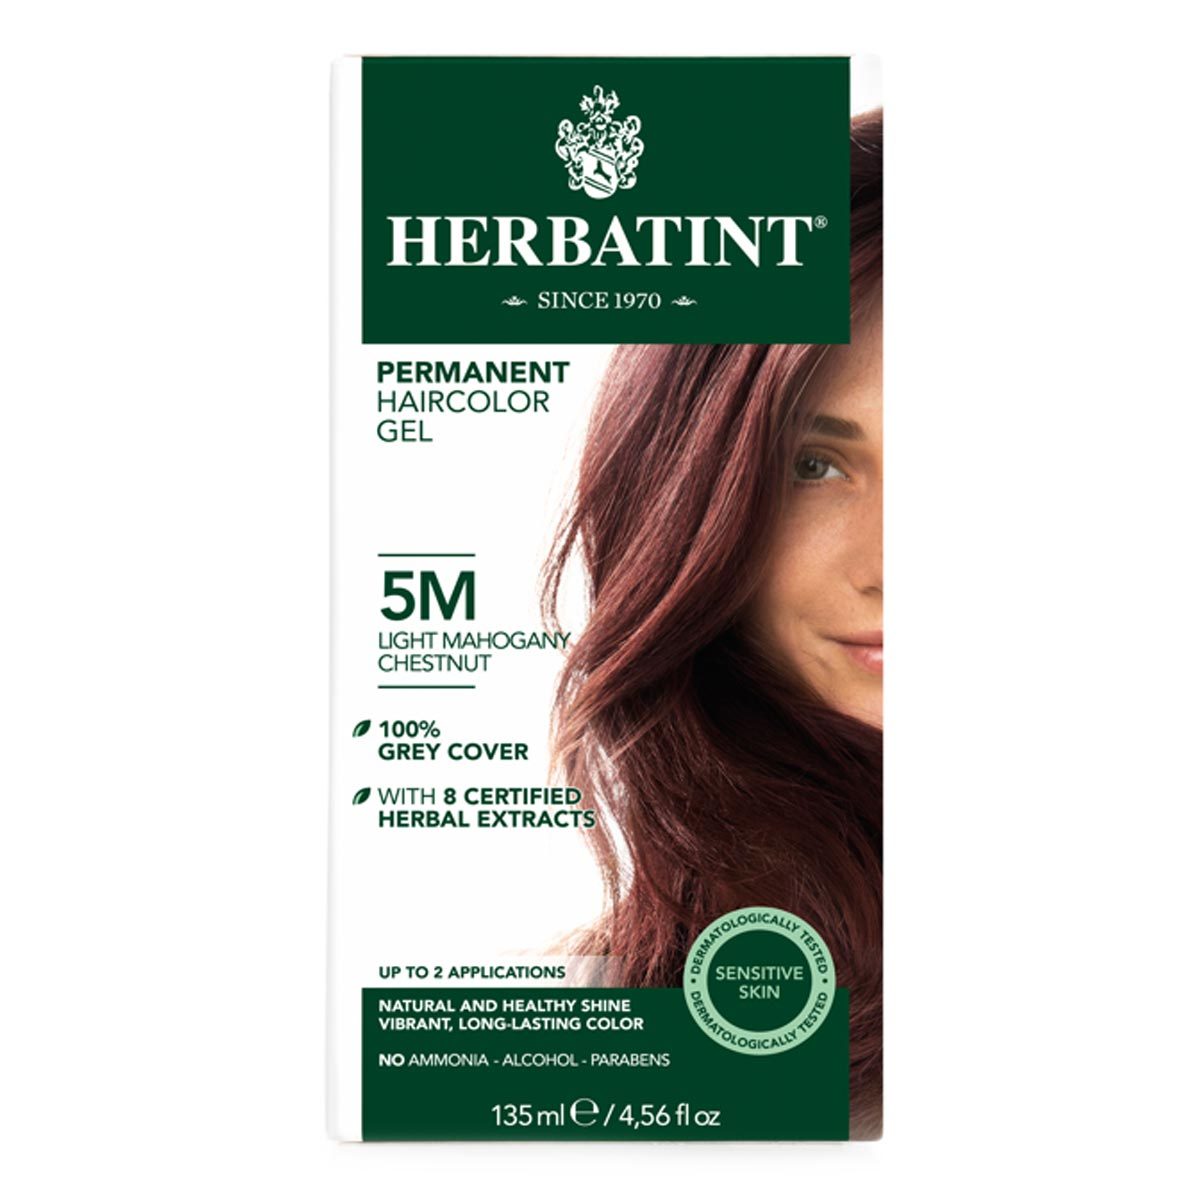 Primary image of 5M Light Mahogany Chestnut Permanent Hair Color Gel